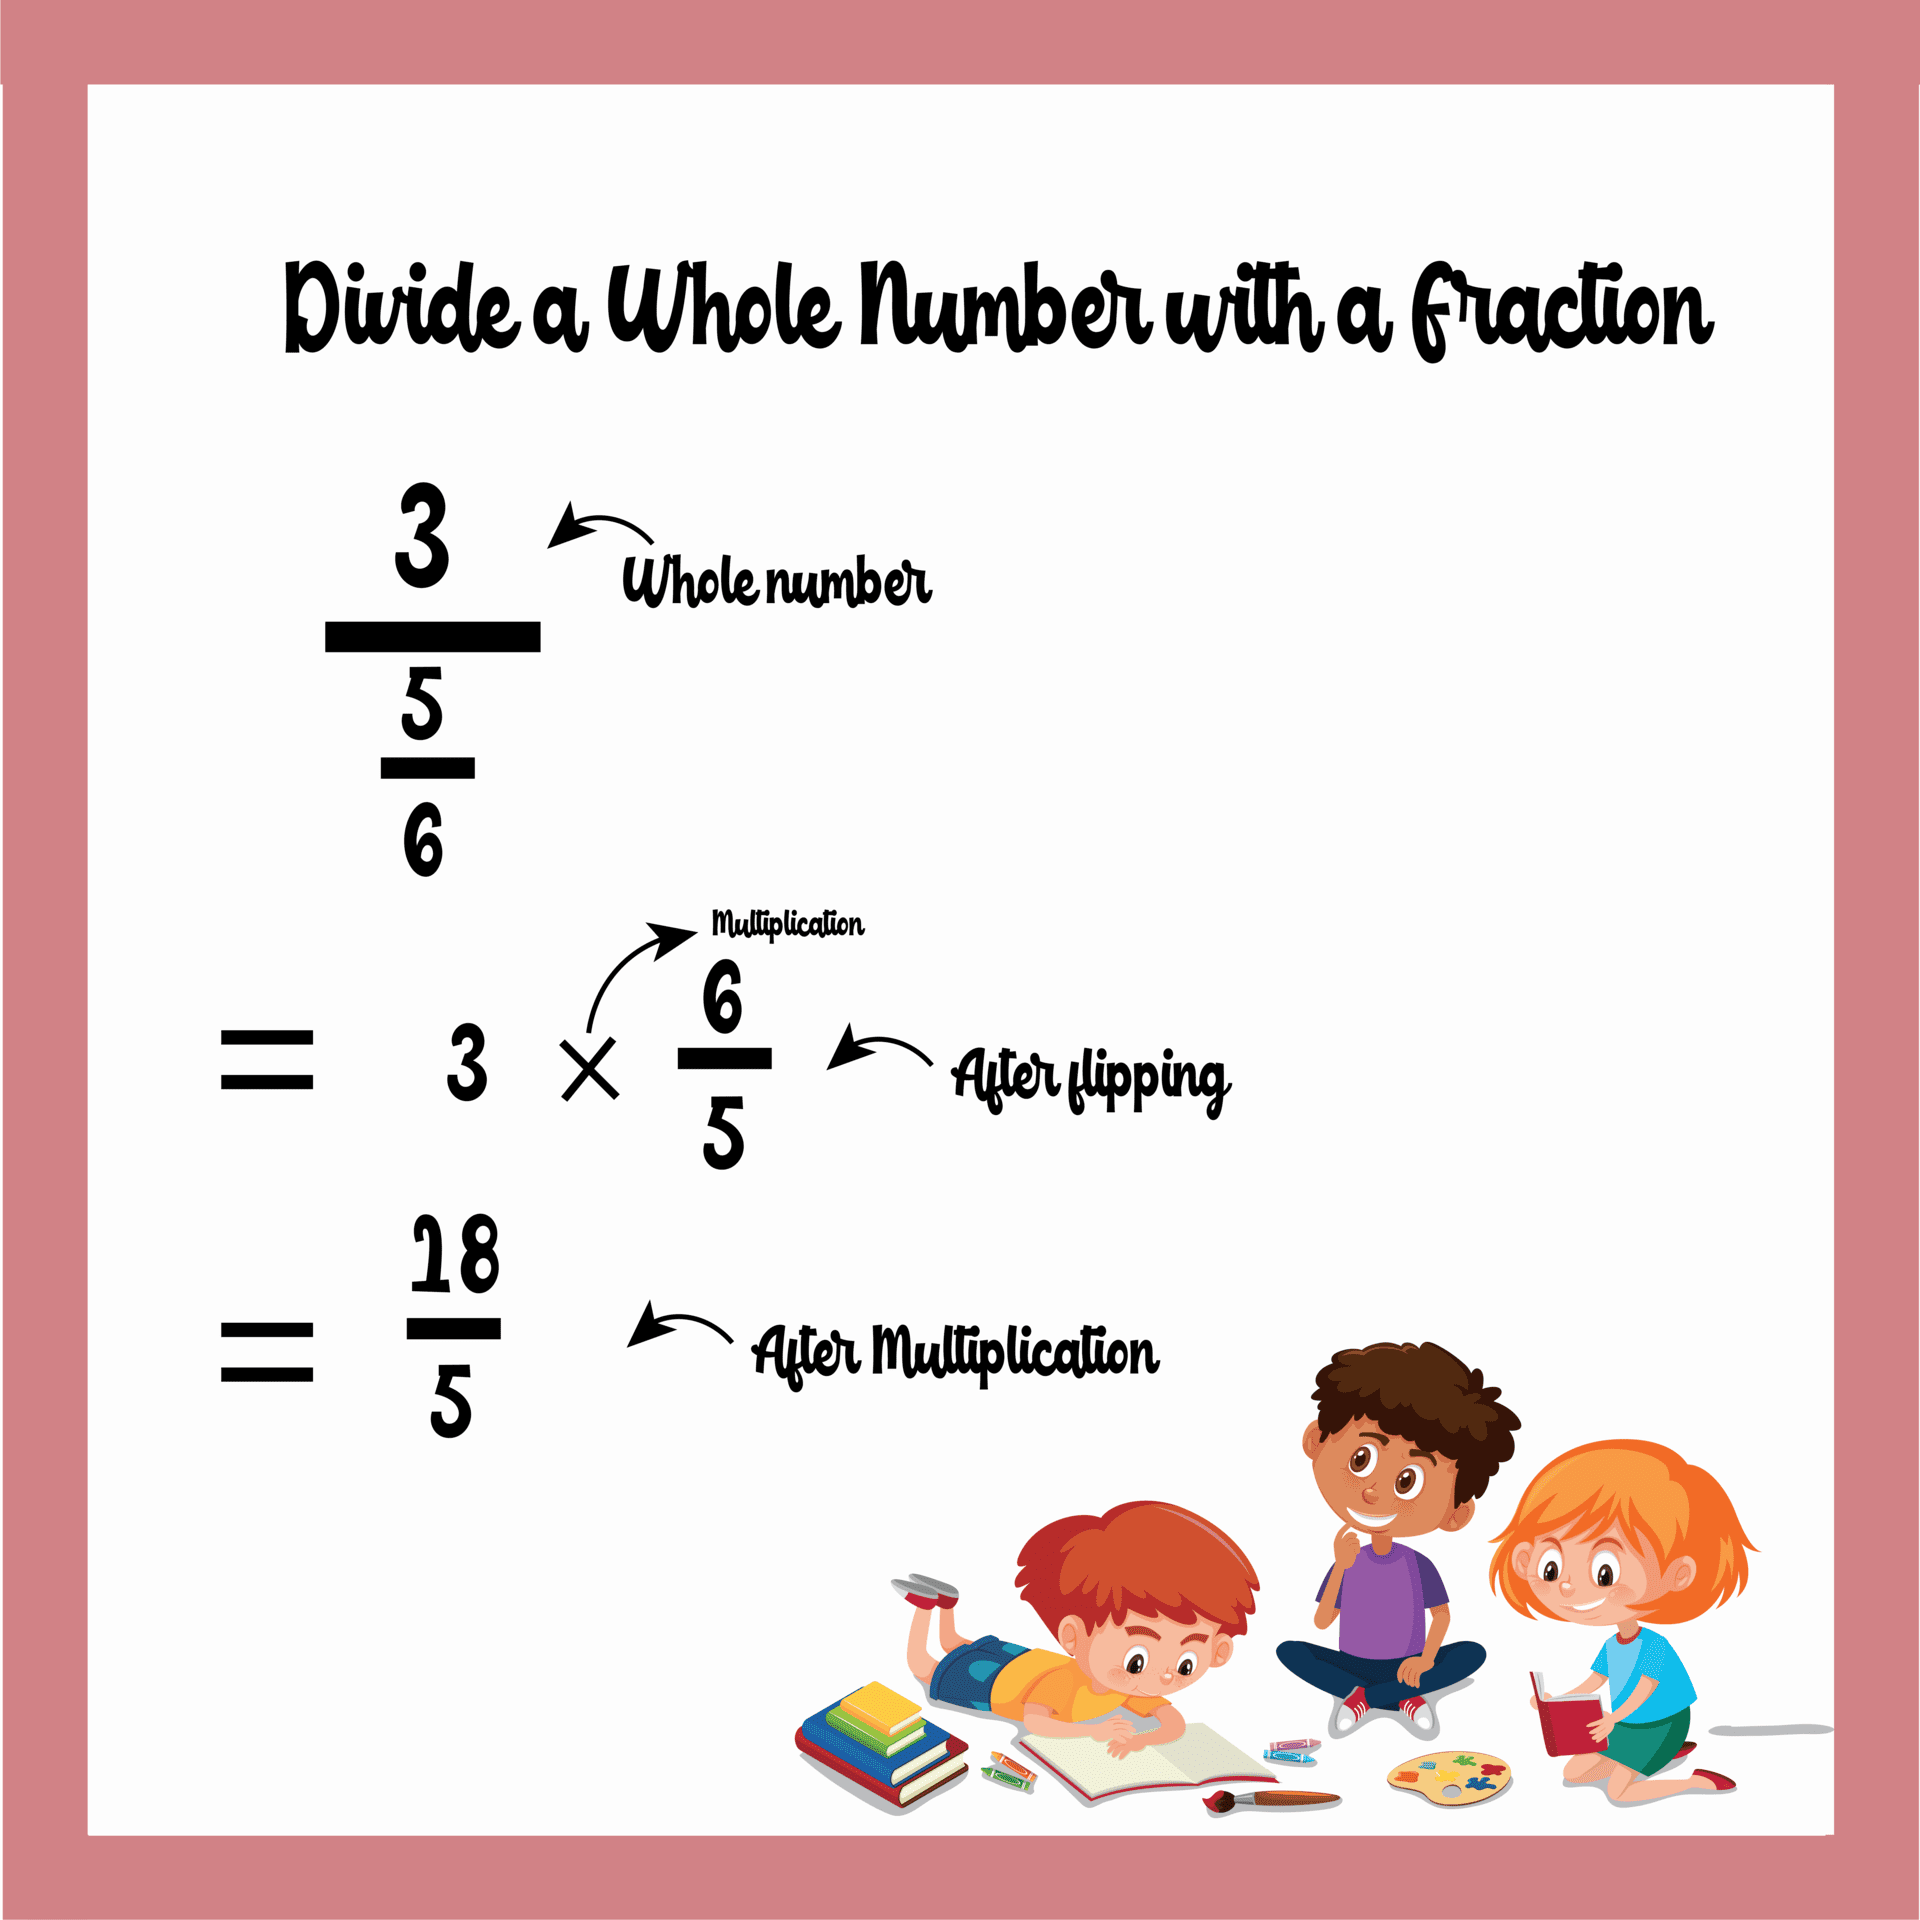 Divide whole number with a fraction for dividing fractions with unlike denominators worksheets